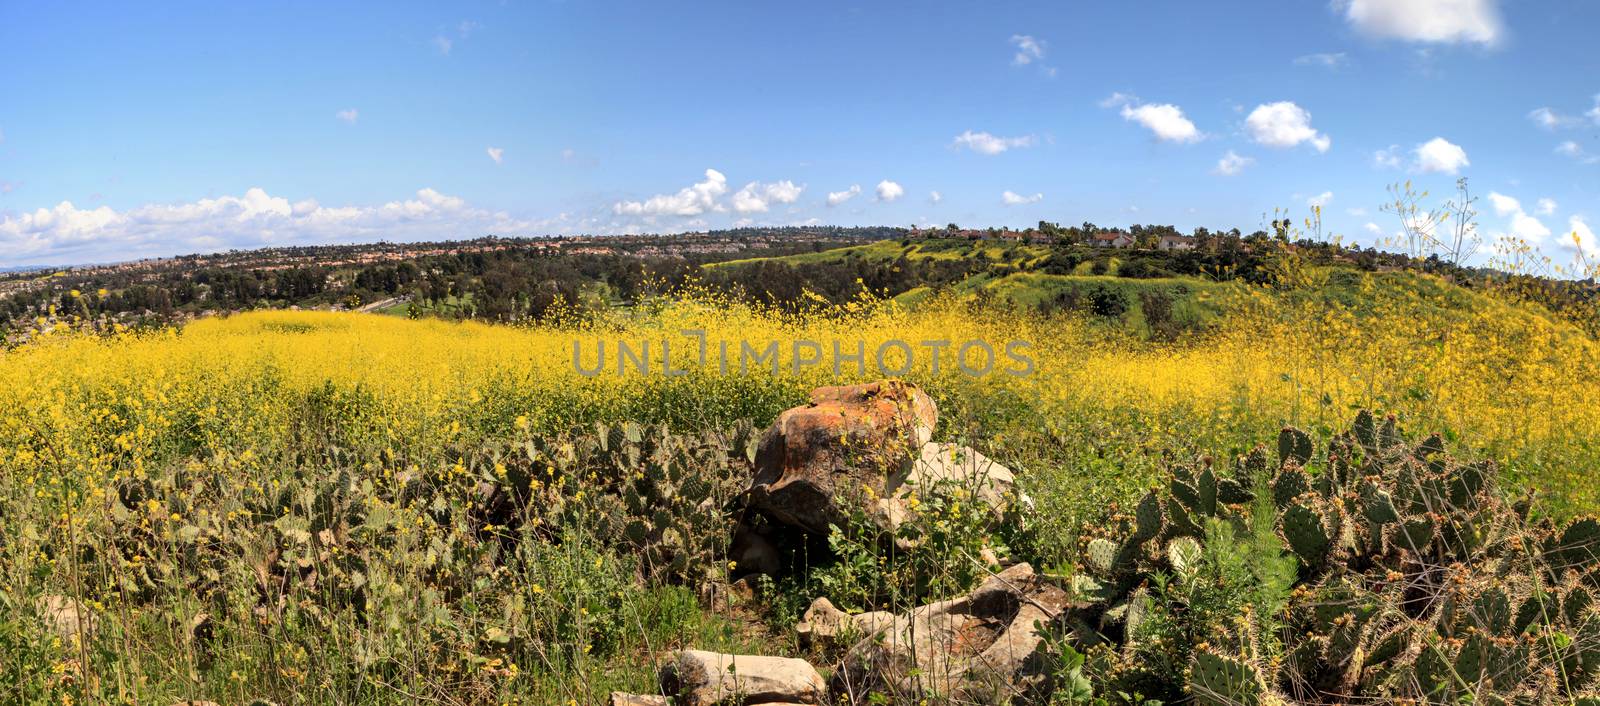 Aliso Viejo Wilderness Park view with yellow wild flowers and green rolling hills from the top hill in Aliso Viejo, California, United States